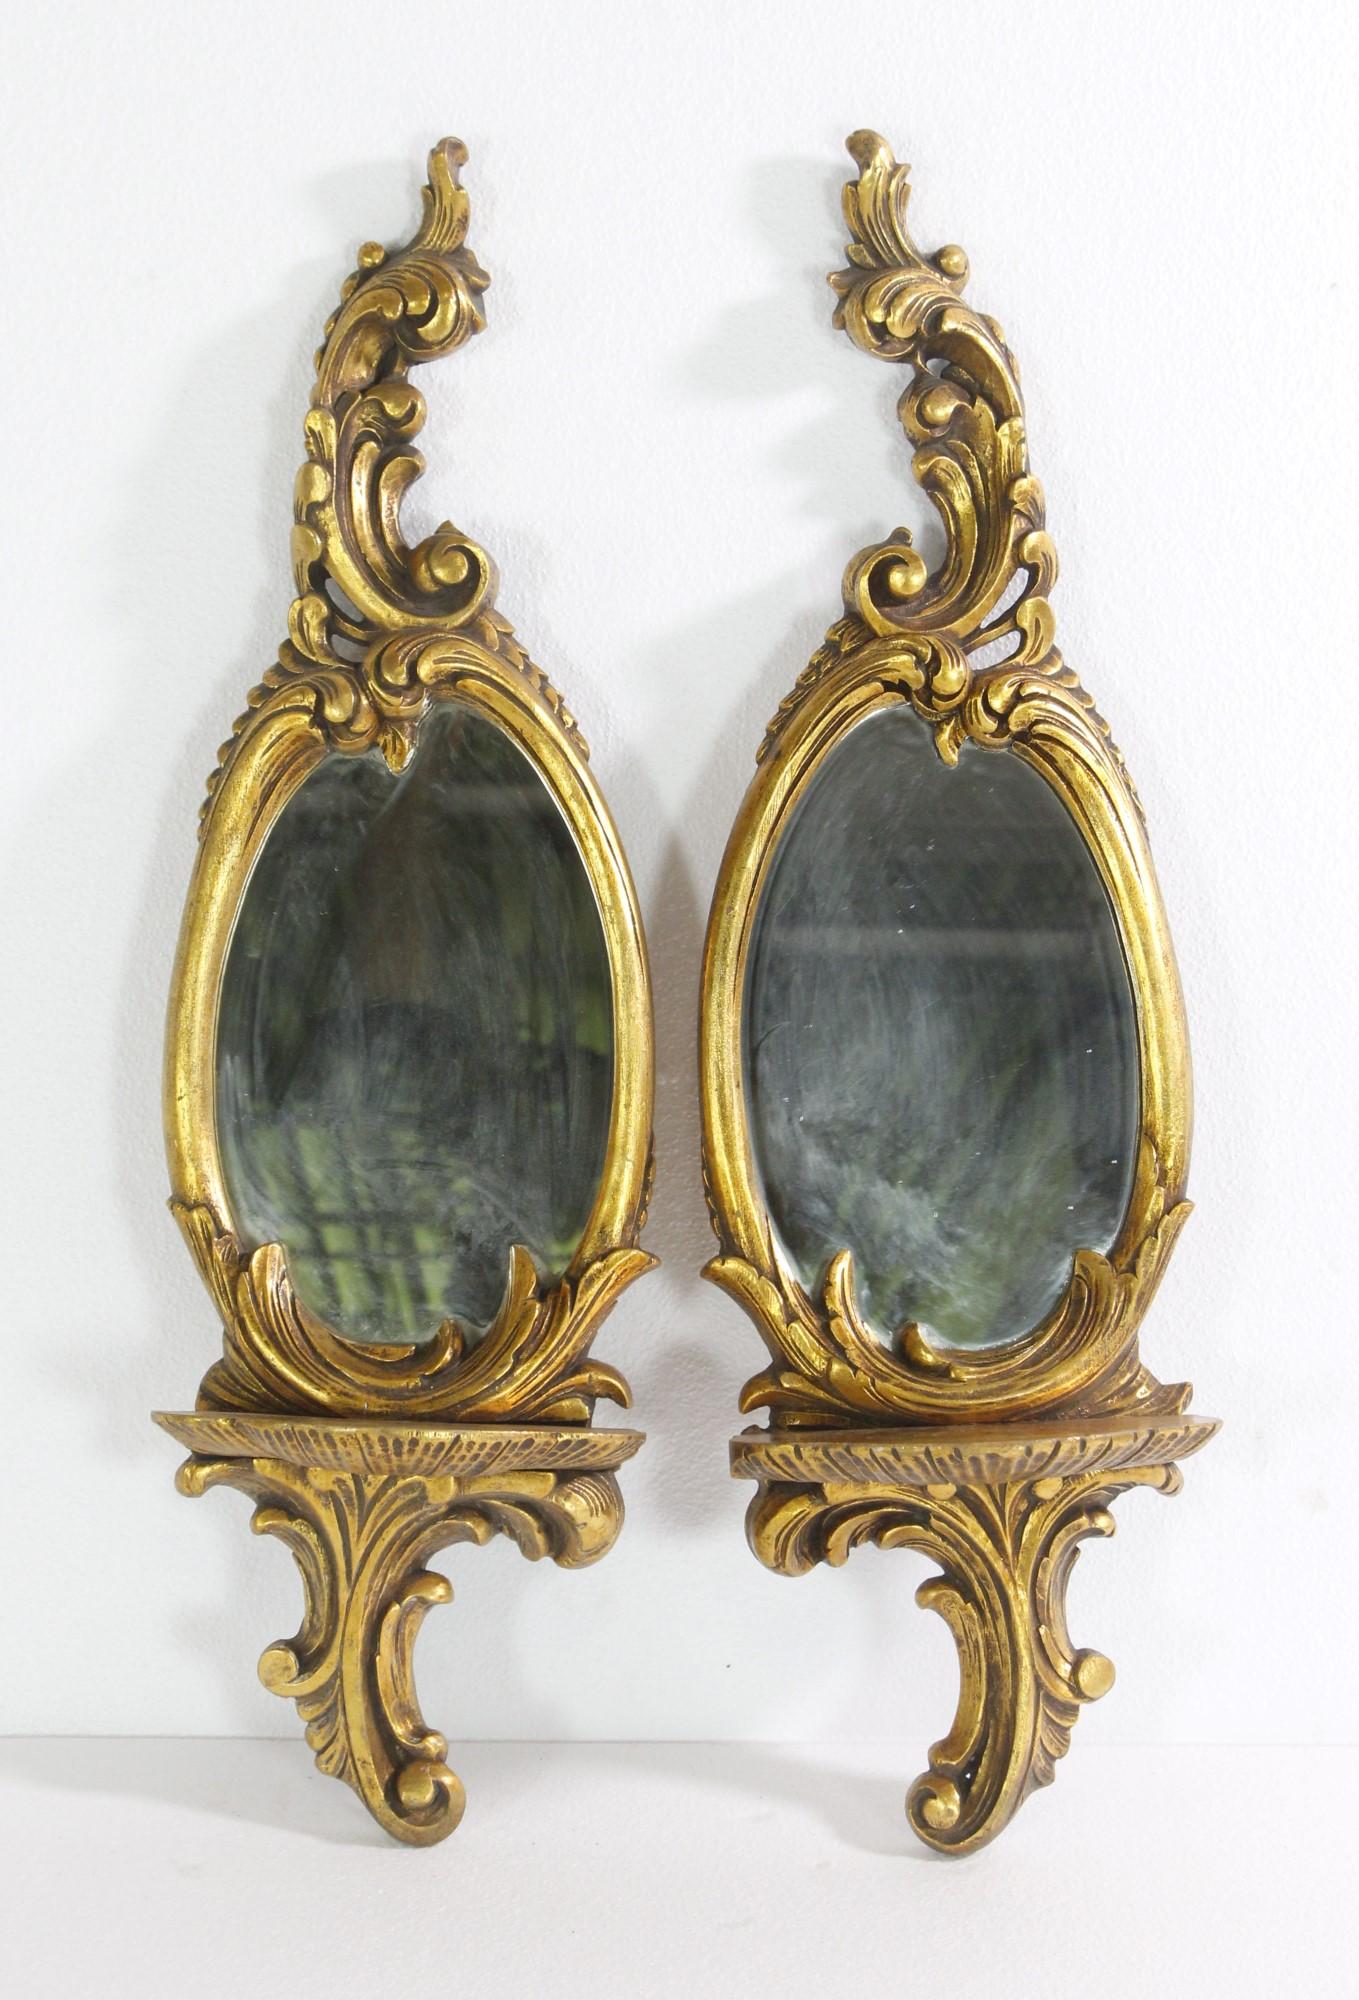 Pair of gilded wooden wall mirrors with shelf and foliage details. The mirrors are oval shaped, and the wood frame has floral details throughout shelf and top. Priced as a pair. Please note, this item is located in our Scranton, PA location.